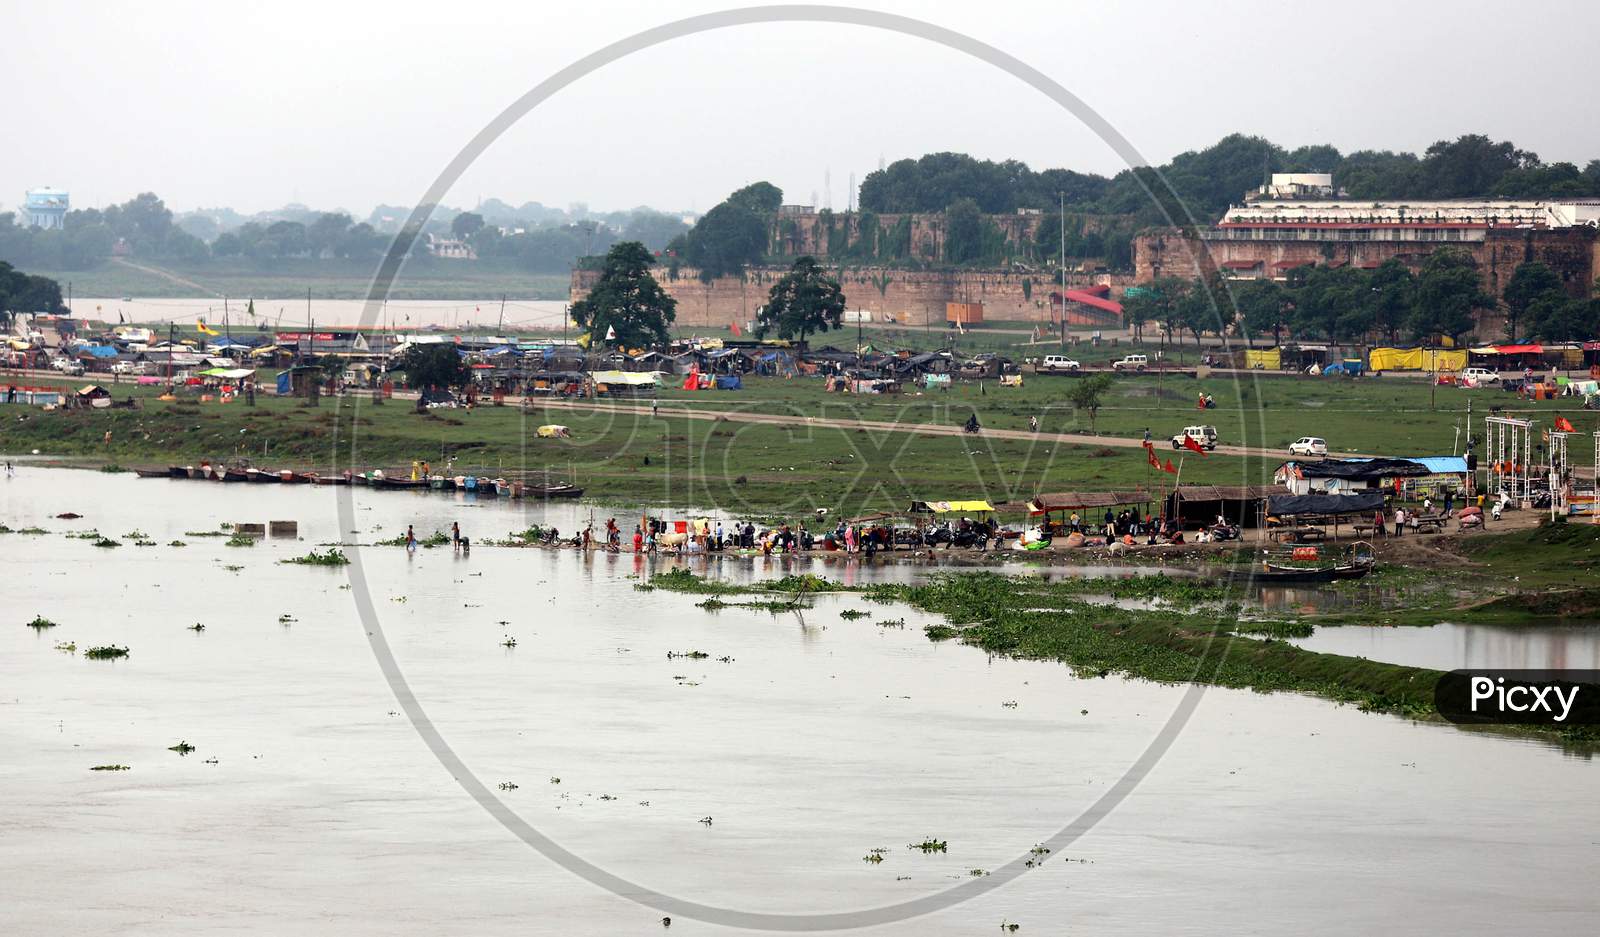 A View Of Ghats Submerged In The Flooded Water Of River Ganga And Yamuna After Heavy Rains In Prayagraj, August 23, 2020